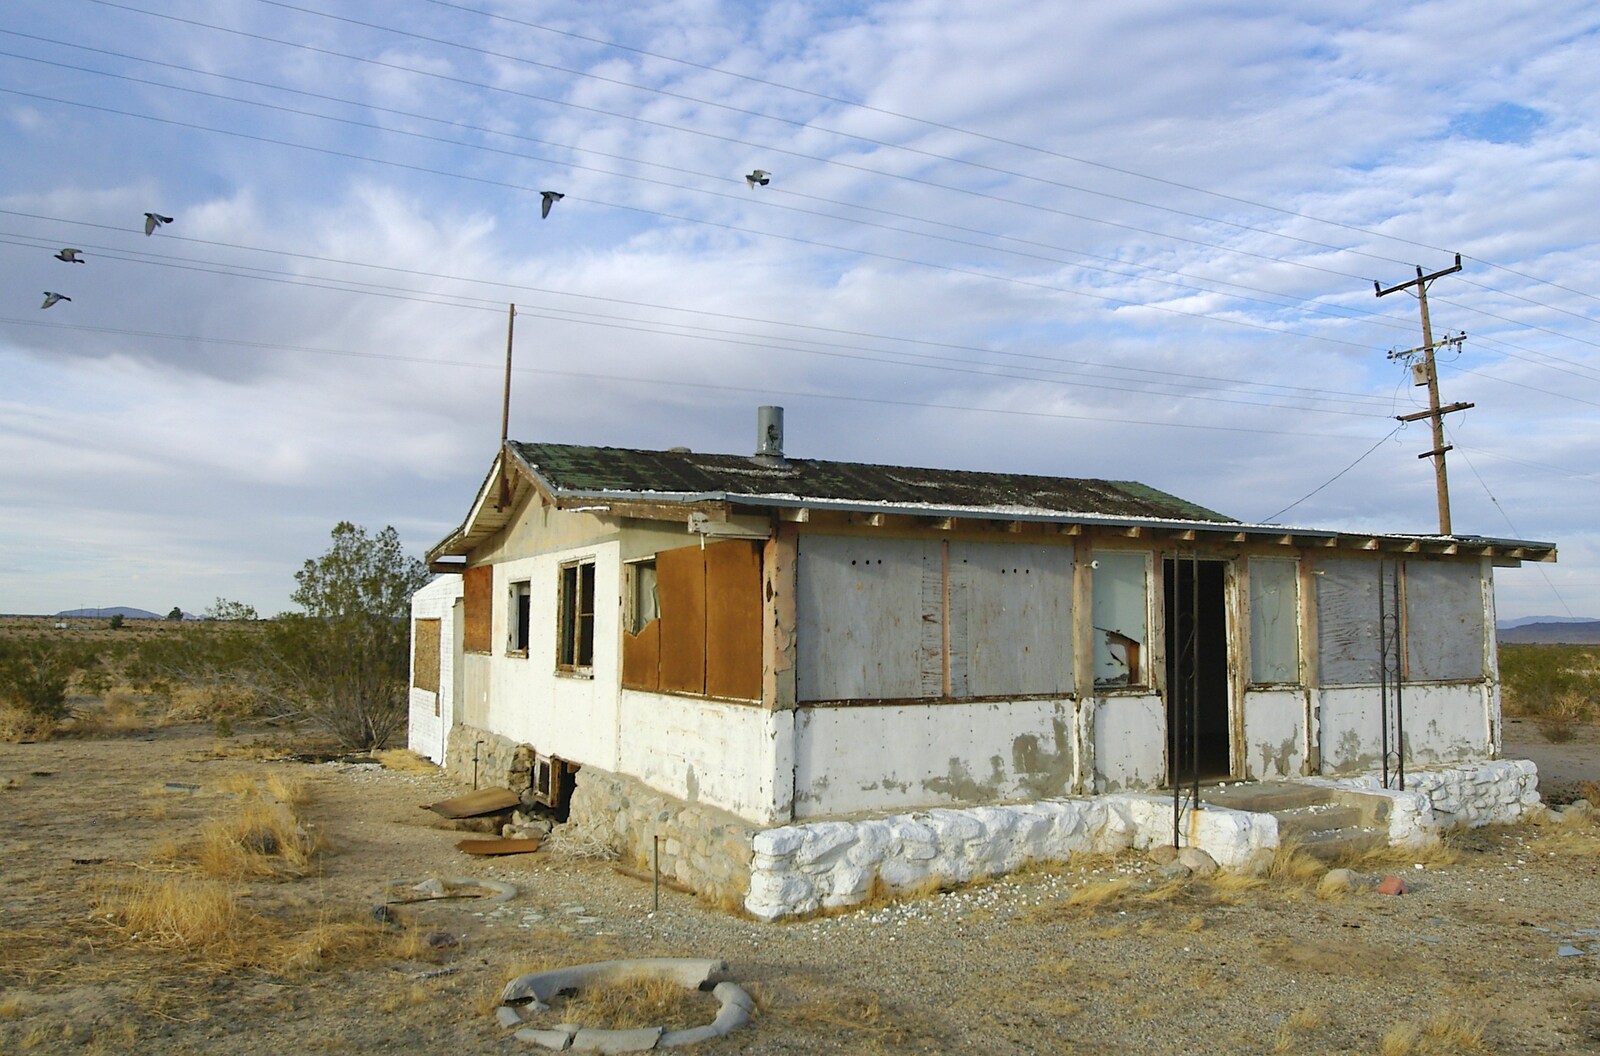 Derelict house, Yucca Creek from Mojave Desert: San Diego to Joshua Tree and Twentynine Palms, California, US - 5th March 2006